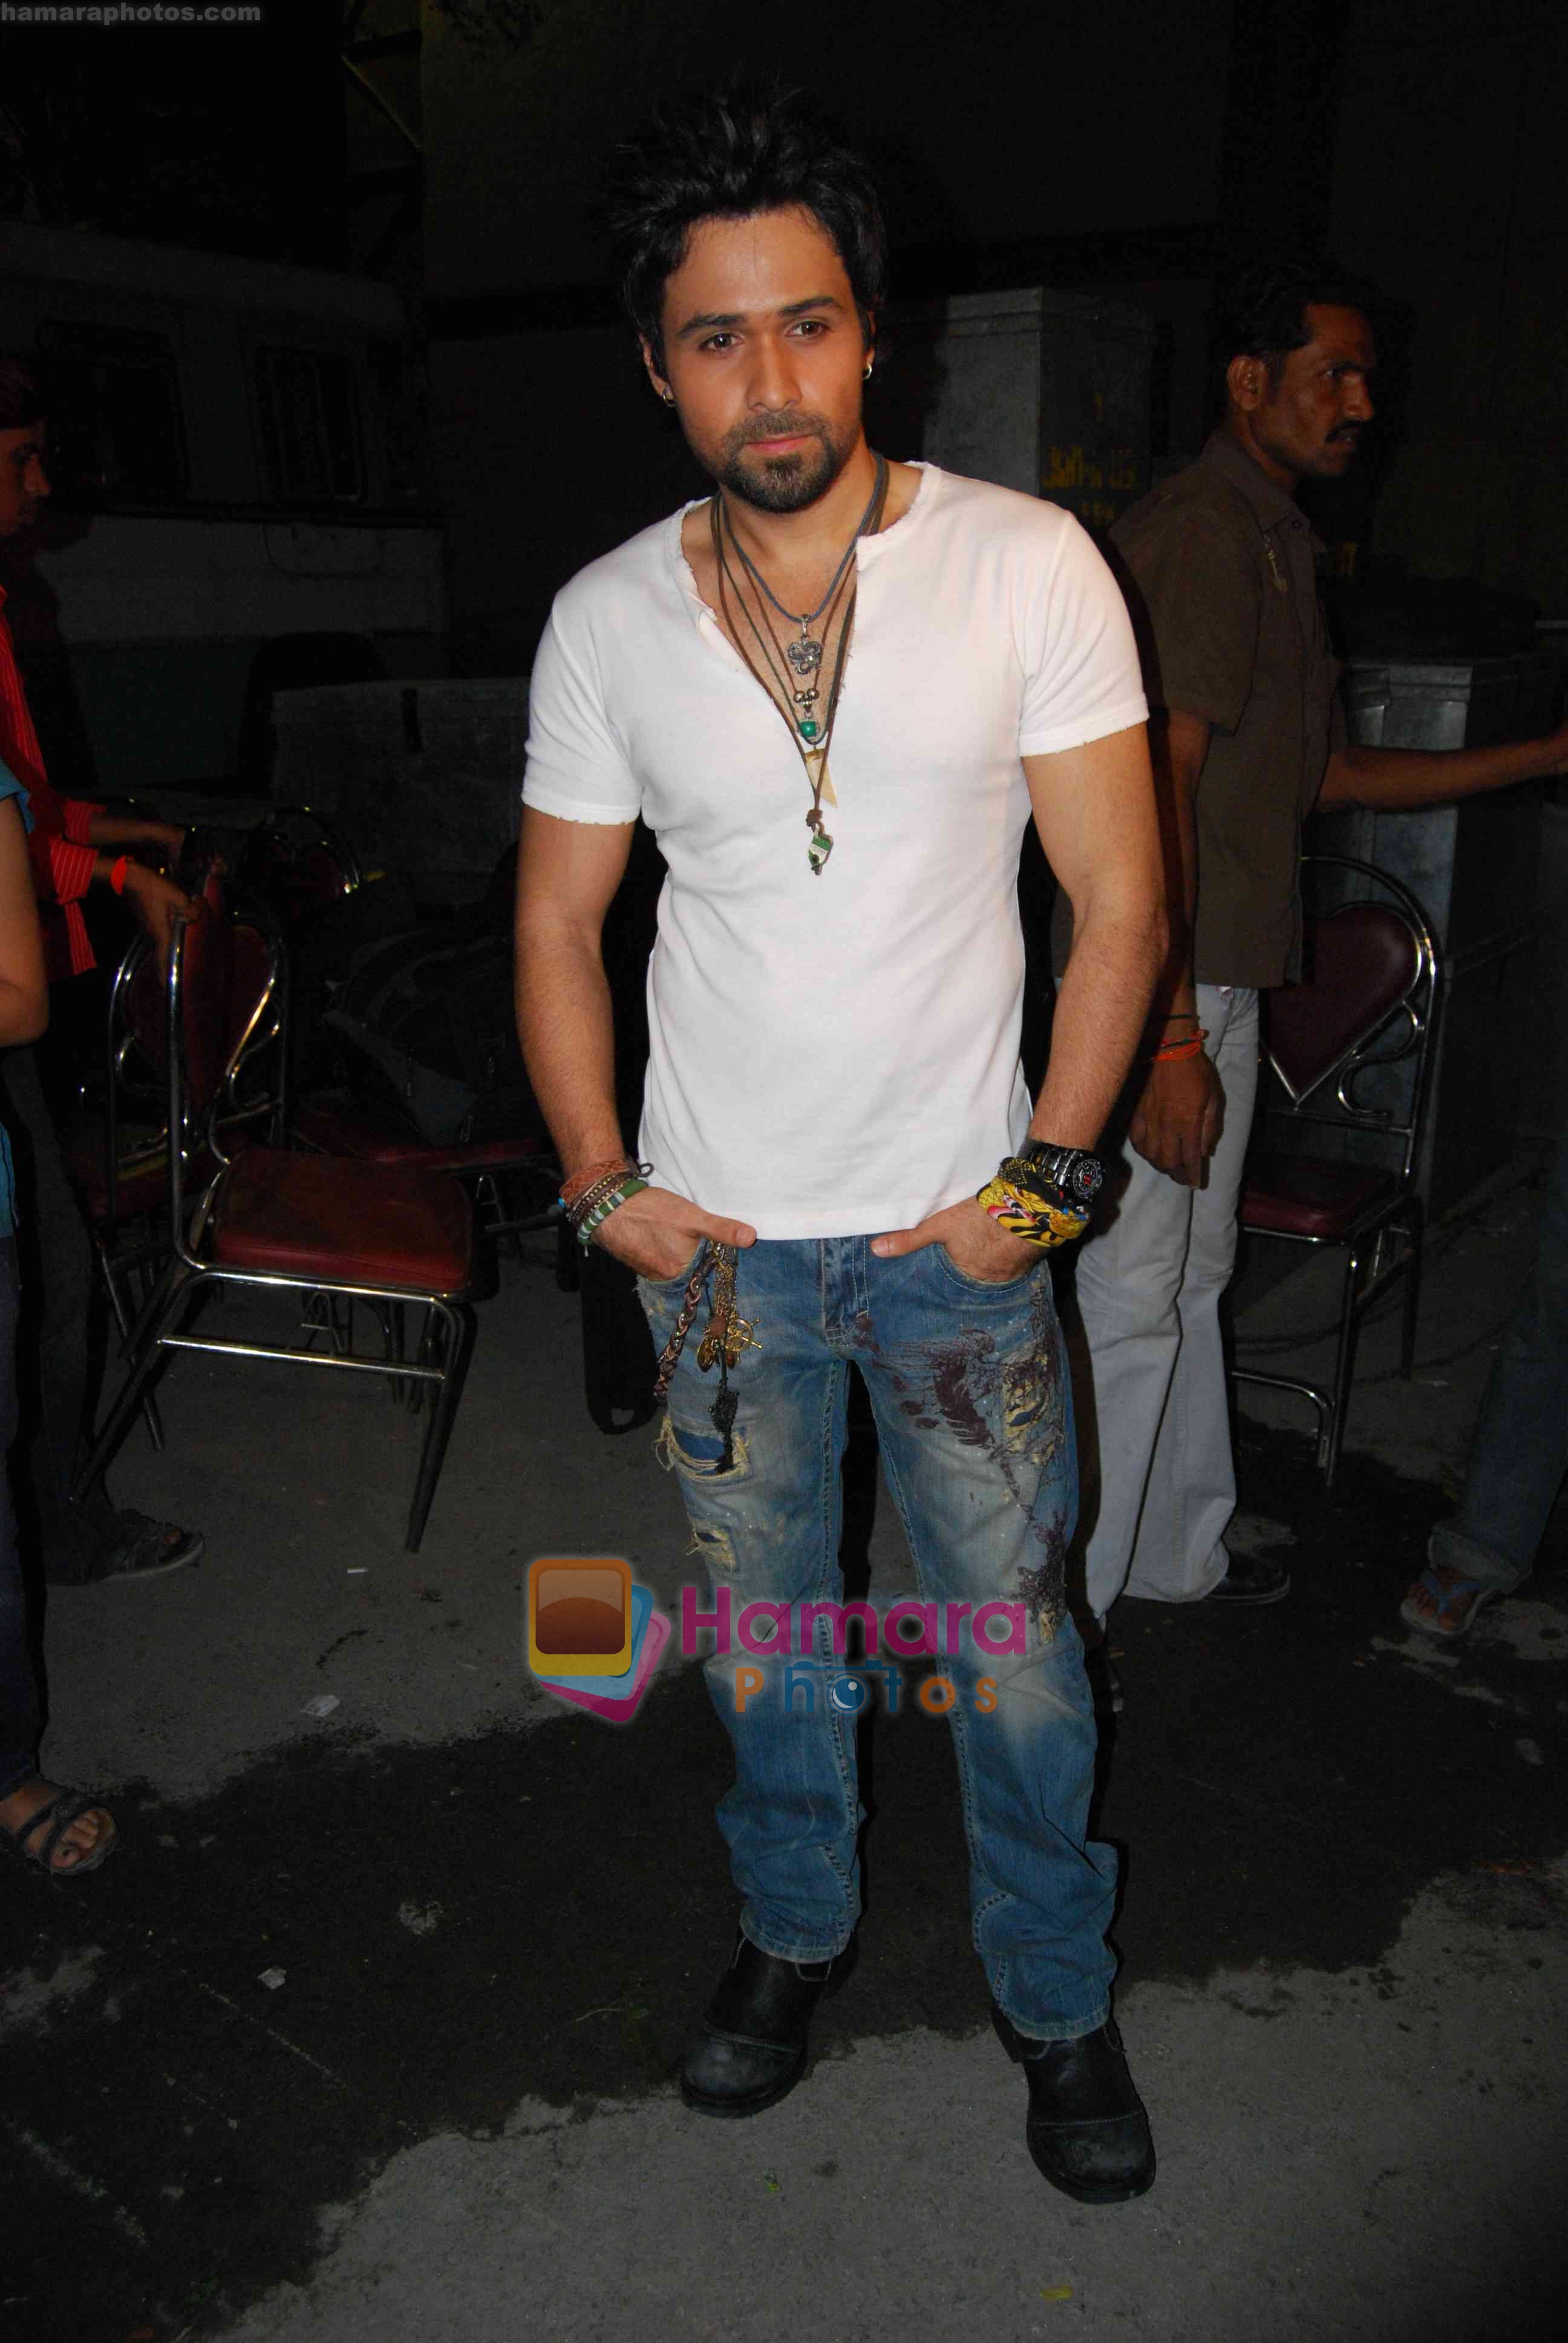 Emraan Hashmi on the set of Raaz - The Mystery continues... 16APR08